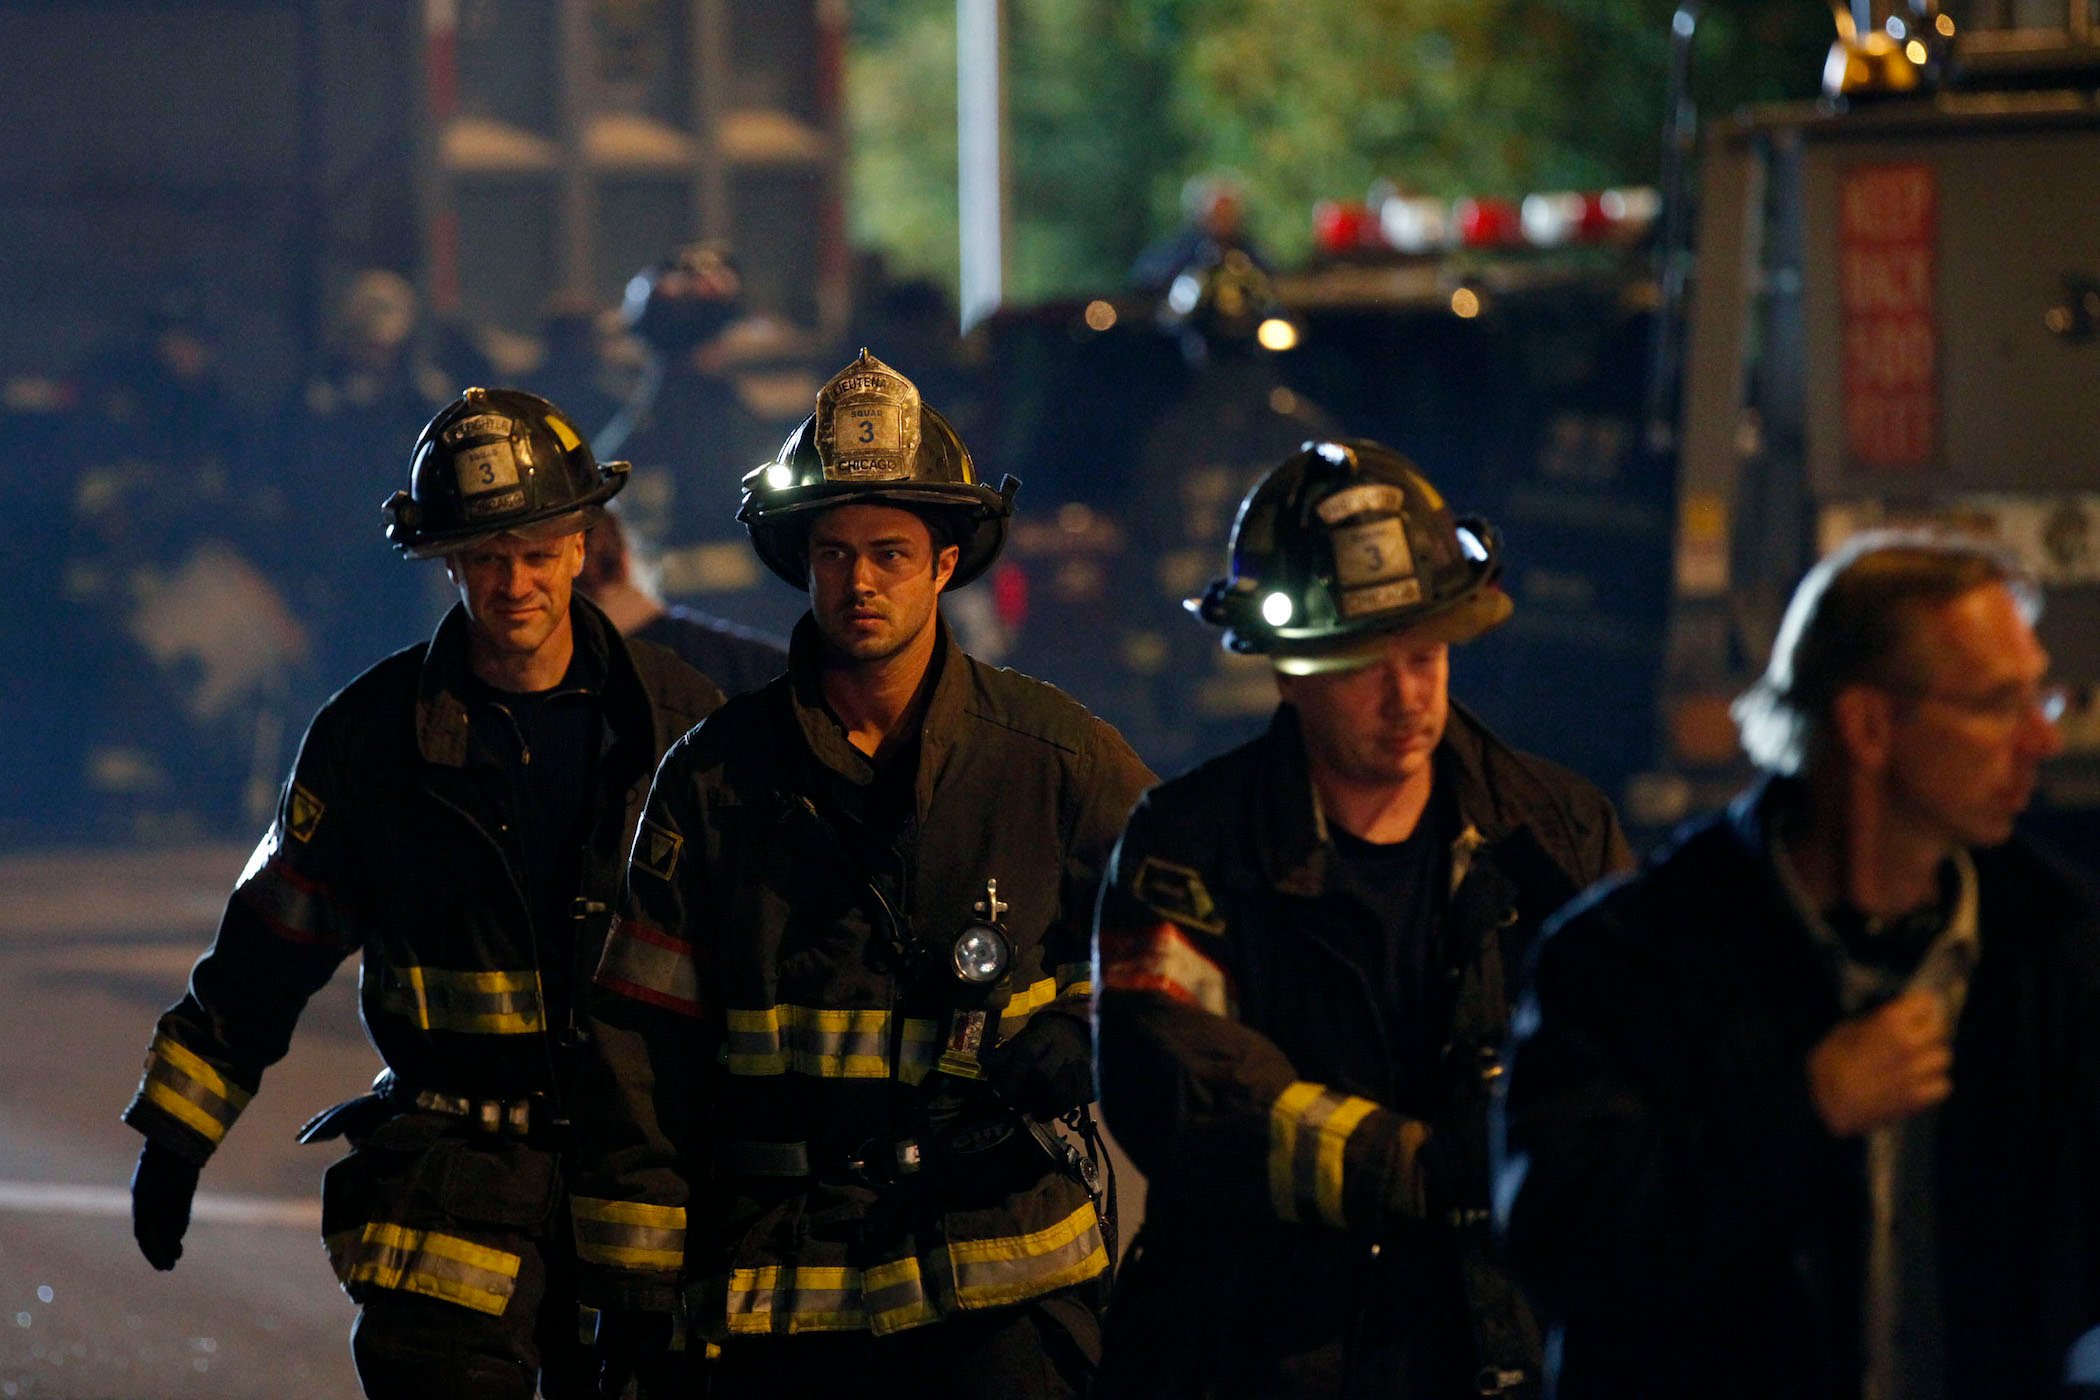 The 'Chicago Fire' crew walking in uniform at night in 'Chicago Fire' Season 1 Episode 7, the Thanksgiving-themed episode.